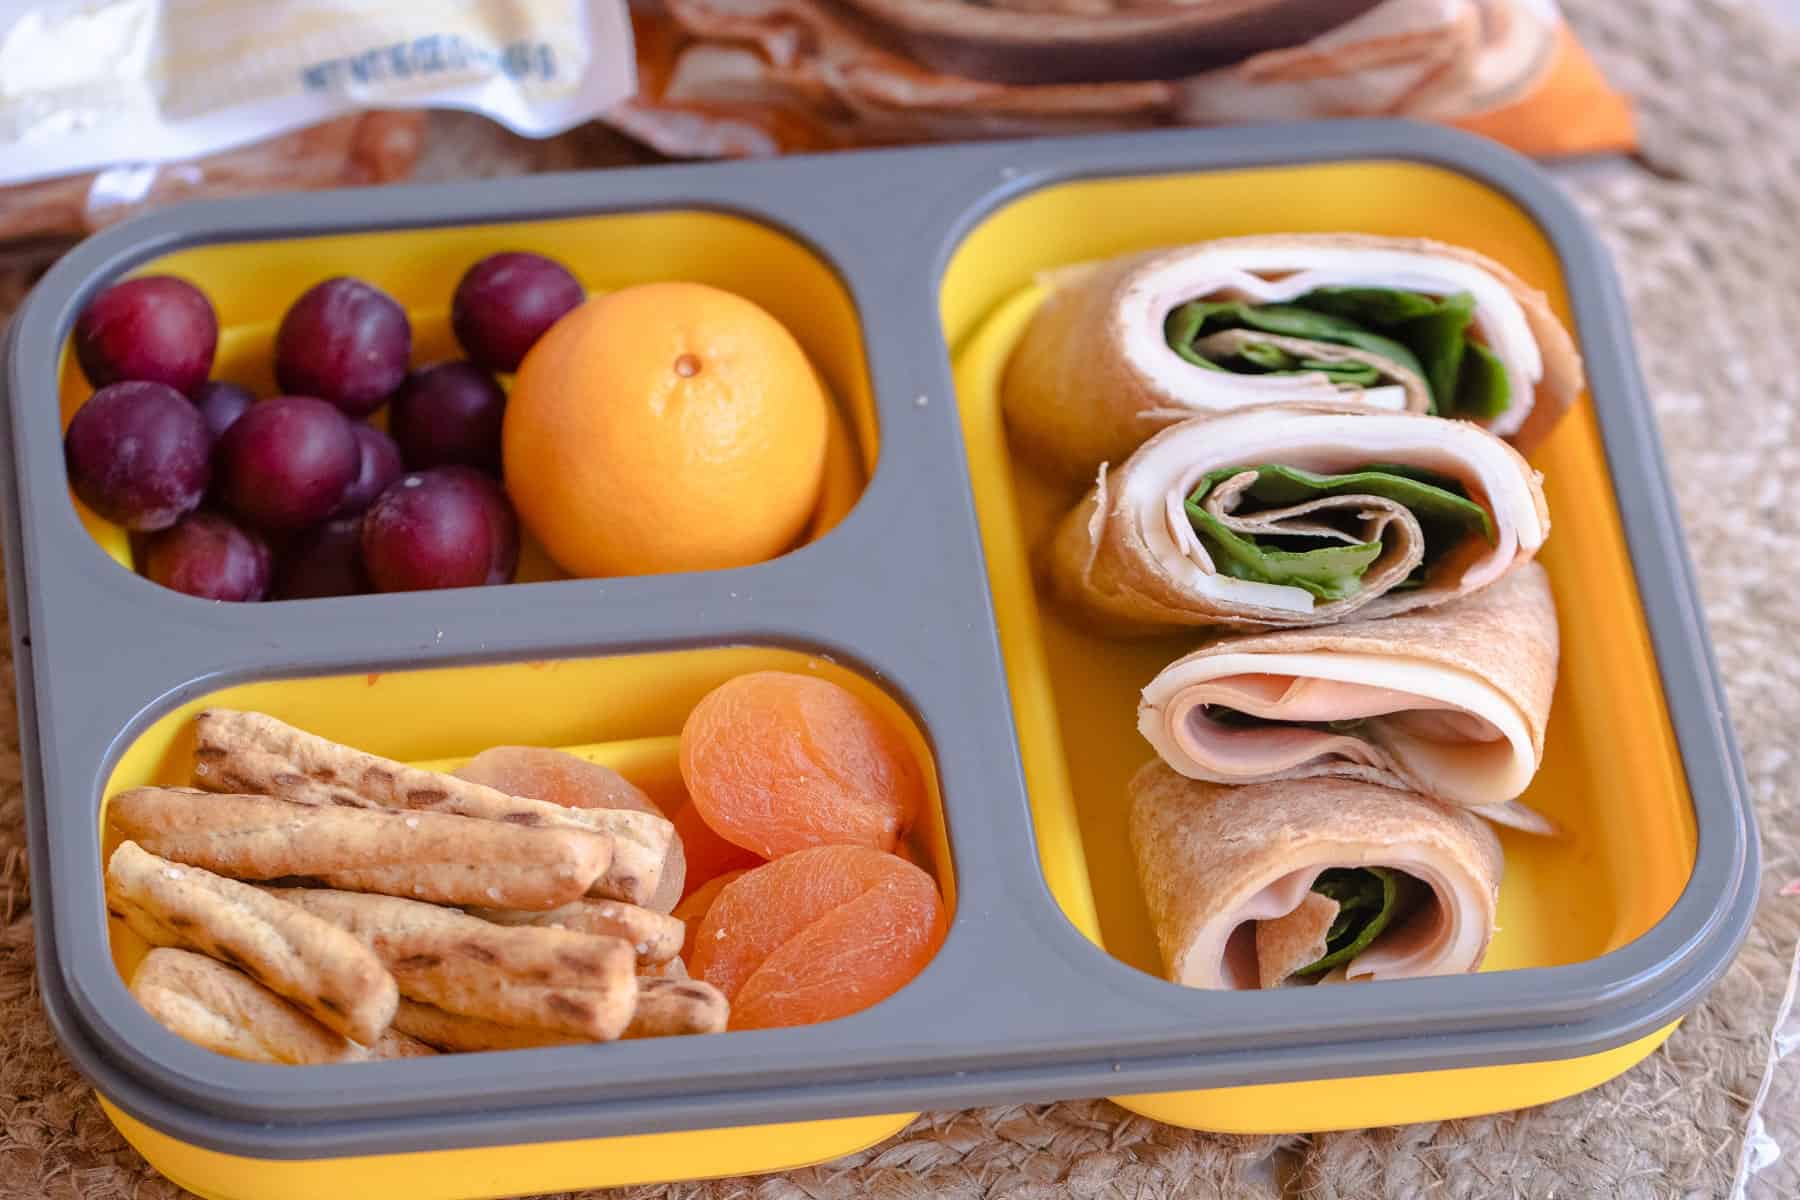 Parents thank blue-haired lunch lady for making their children's school lunches enjoyable - wide 8